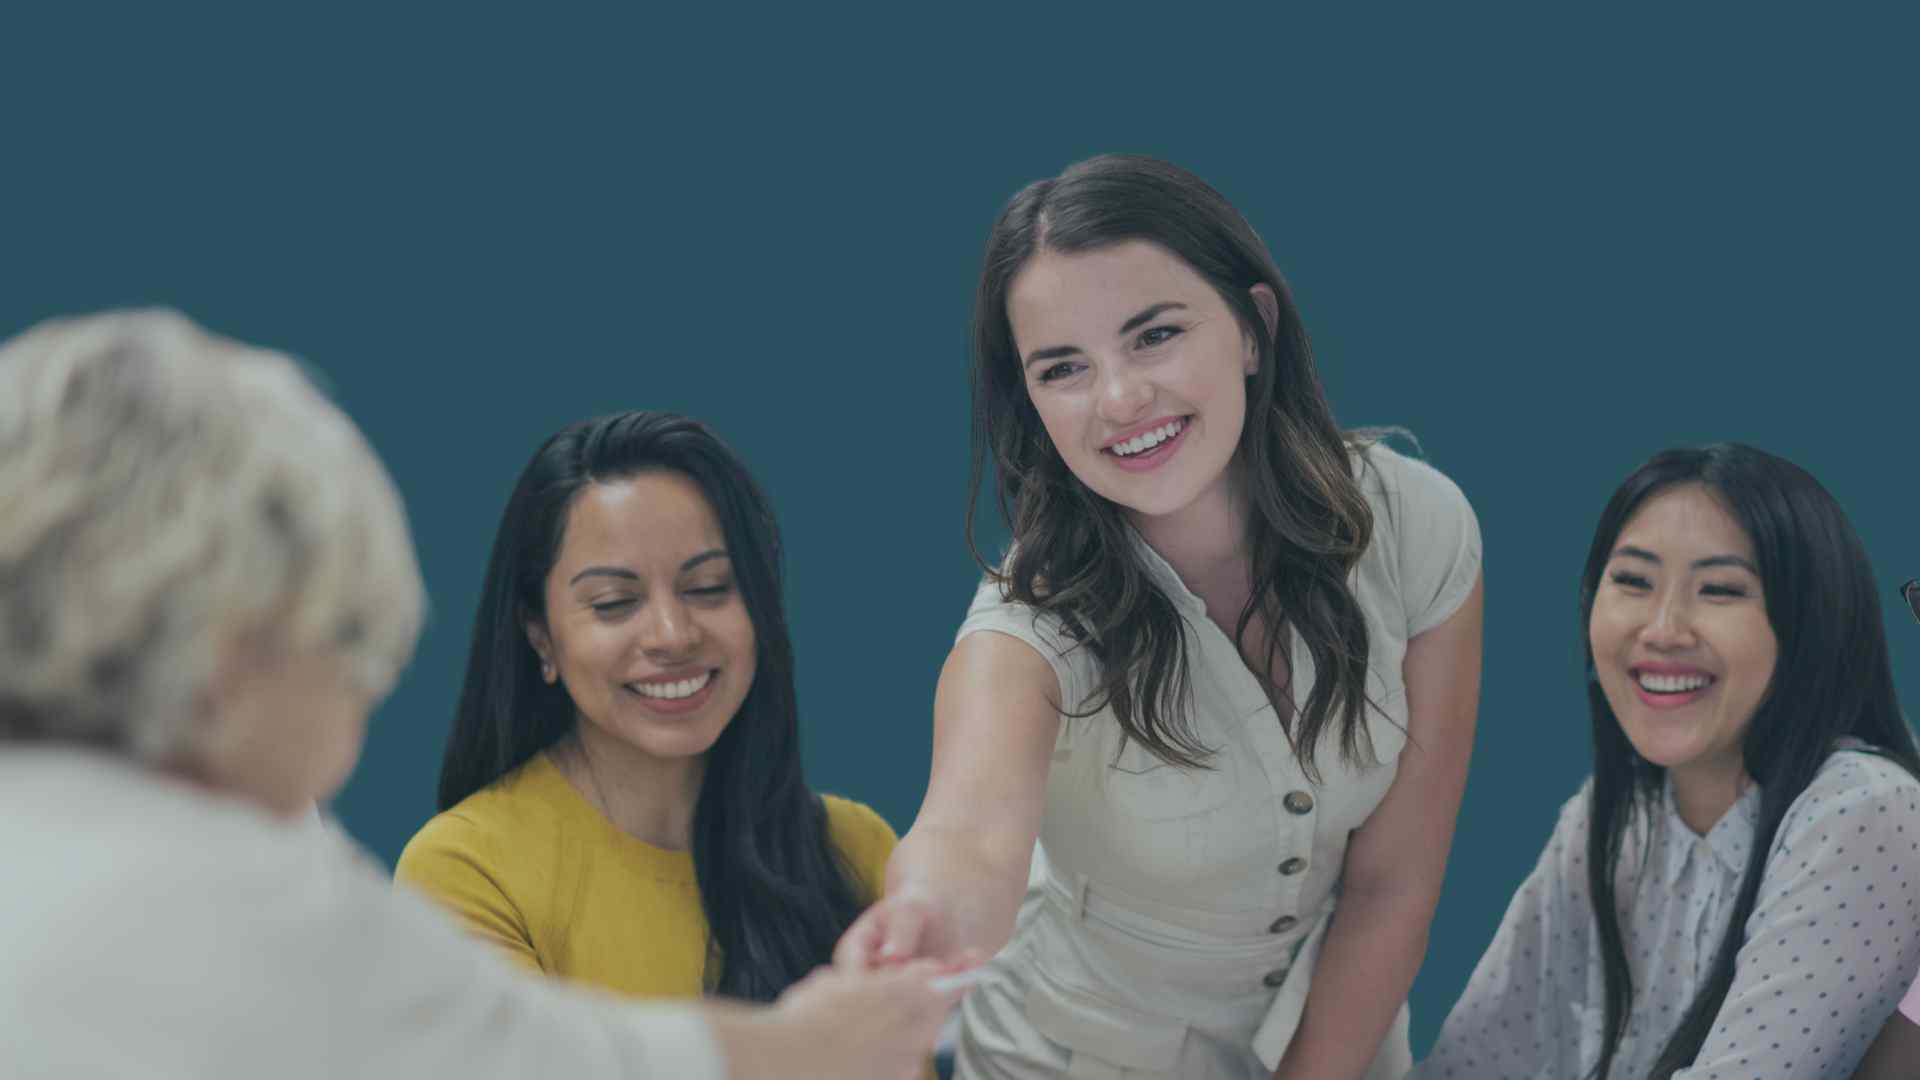 Four diverse women smiling, two of them shaking hands